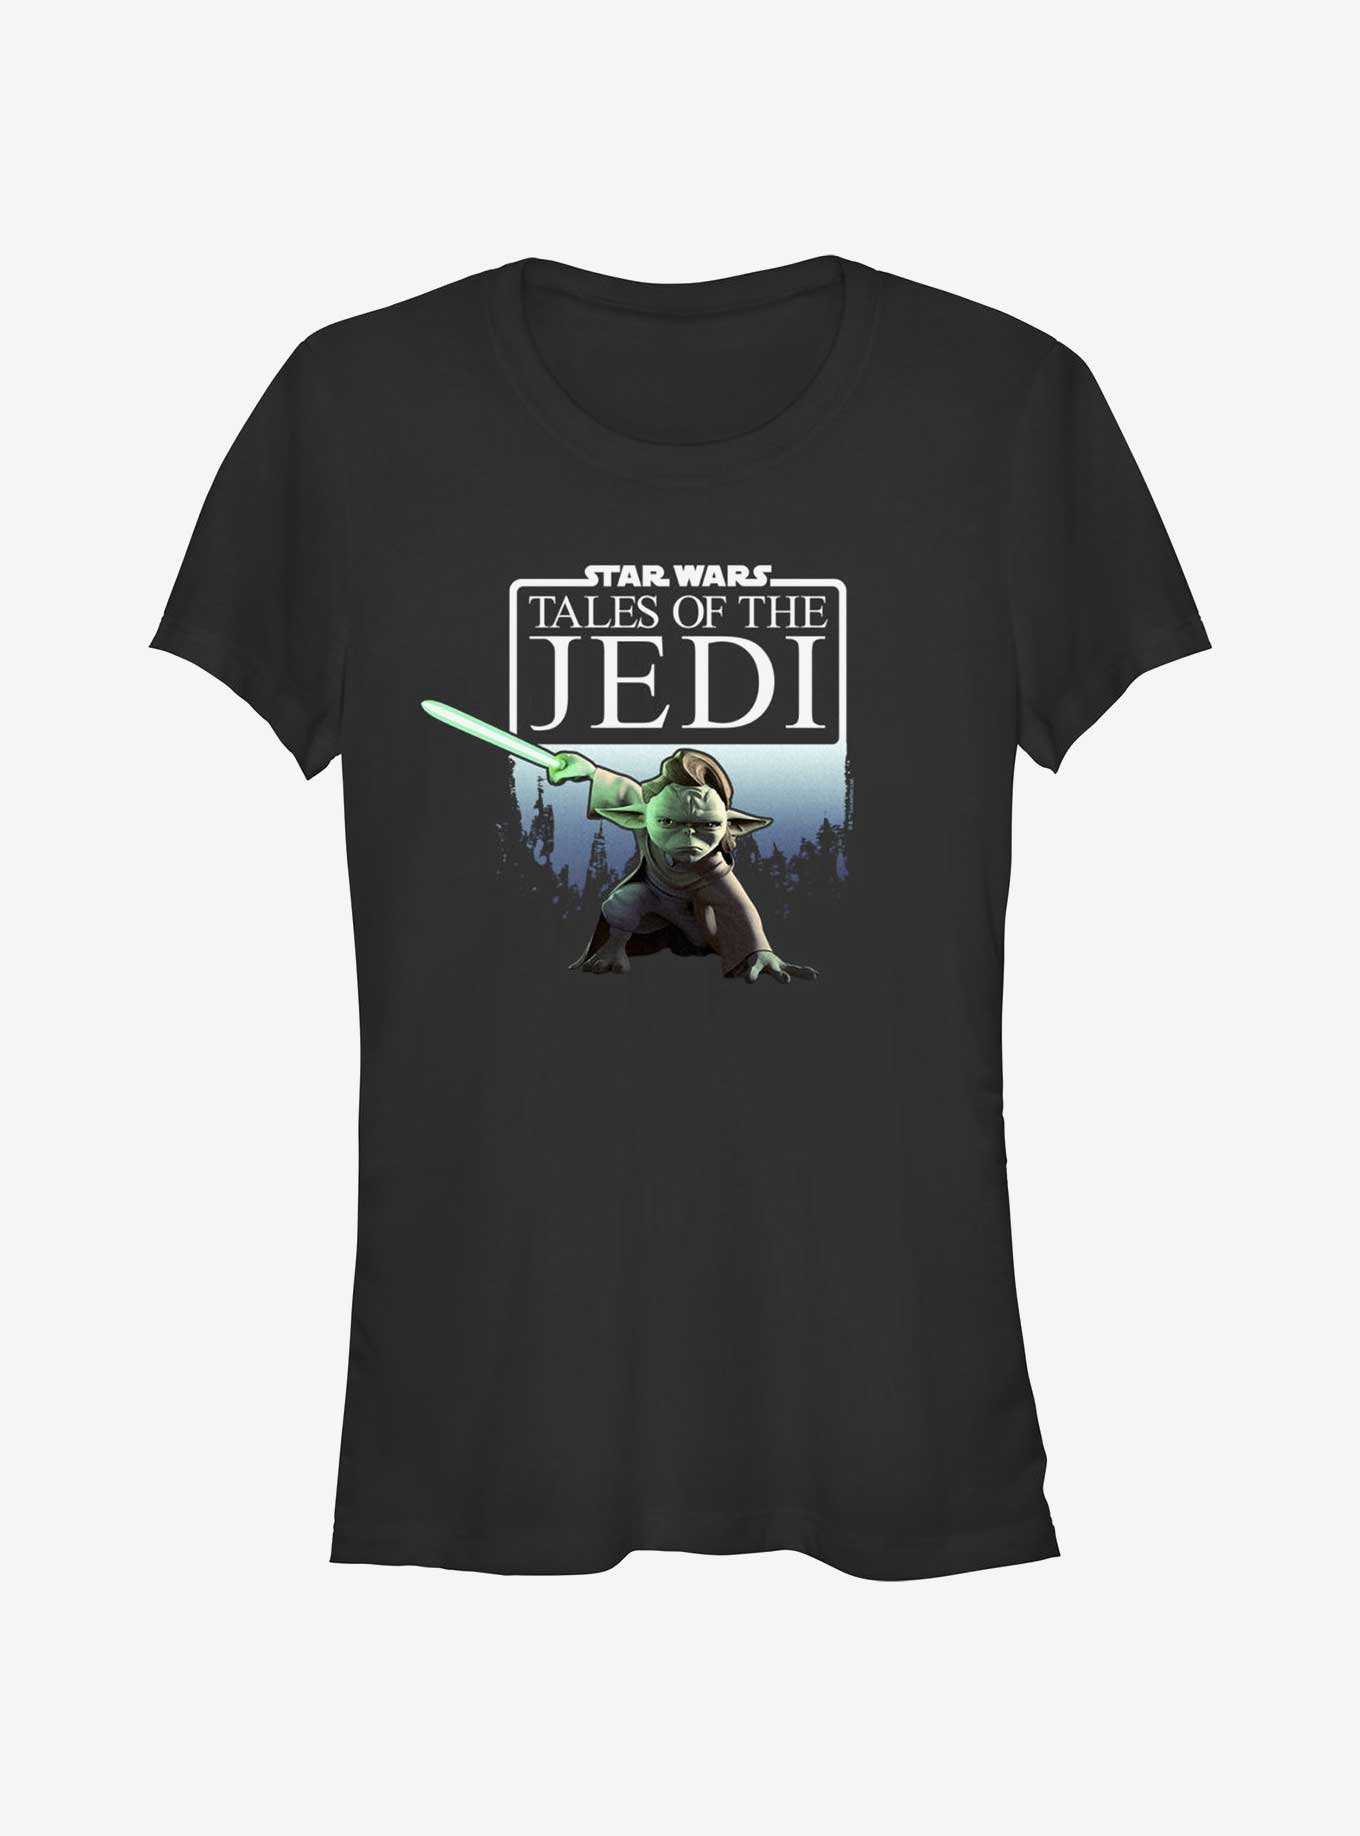 Star Wars: Tales of the Jedi Yaddle Girls T-Shirt, , hi-res